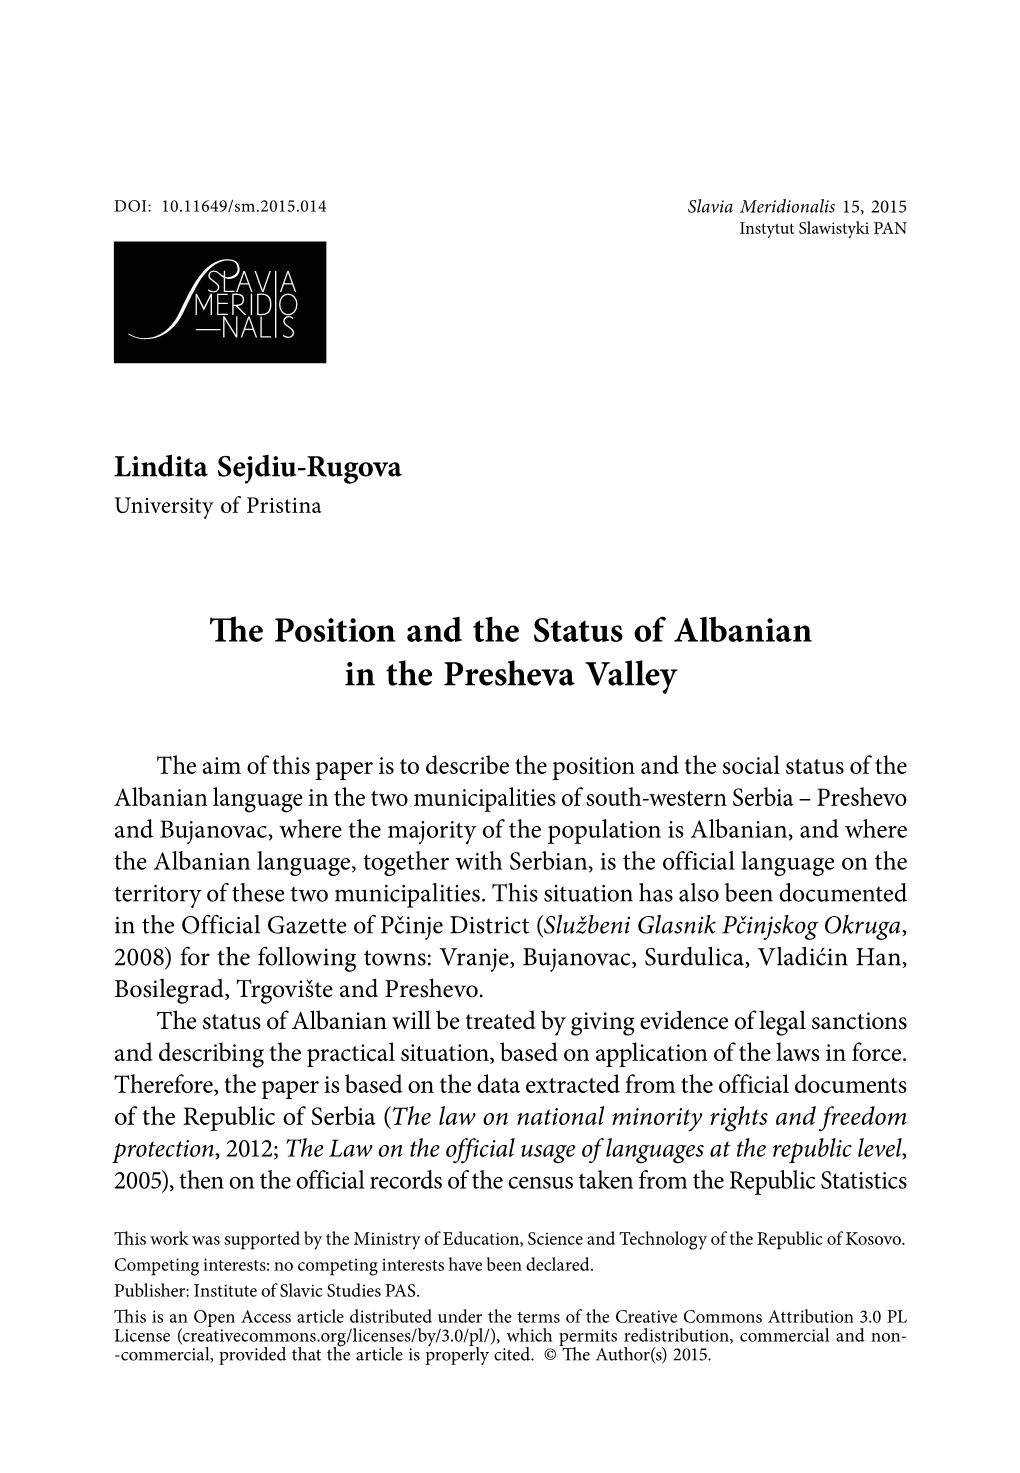 The Position and the Status of Albanian in the Presheva Valley